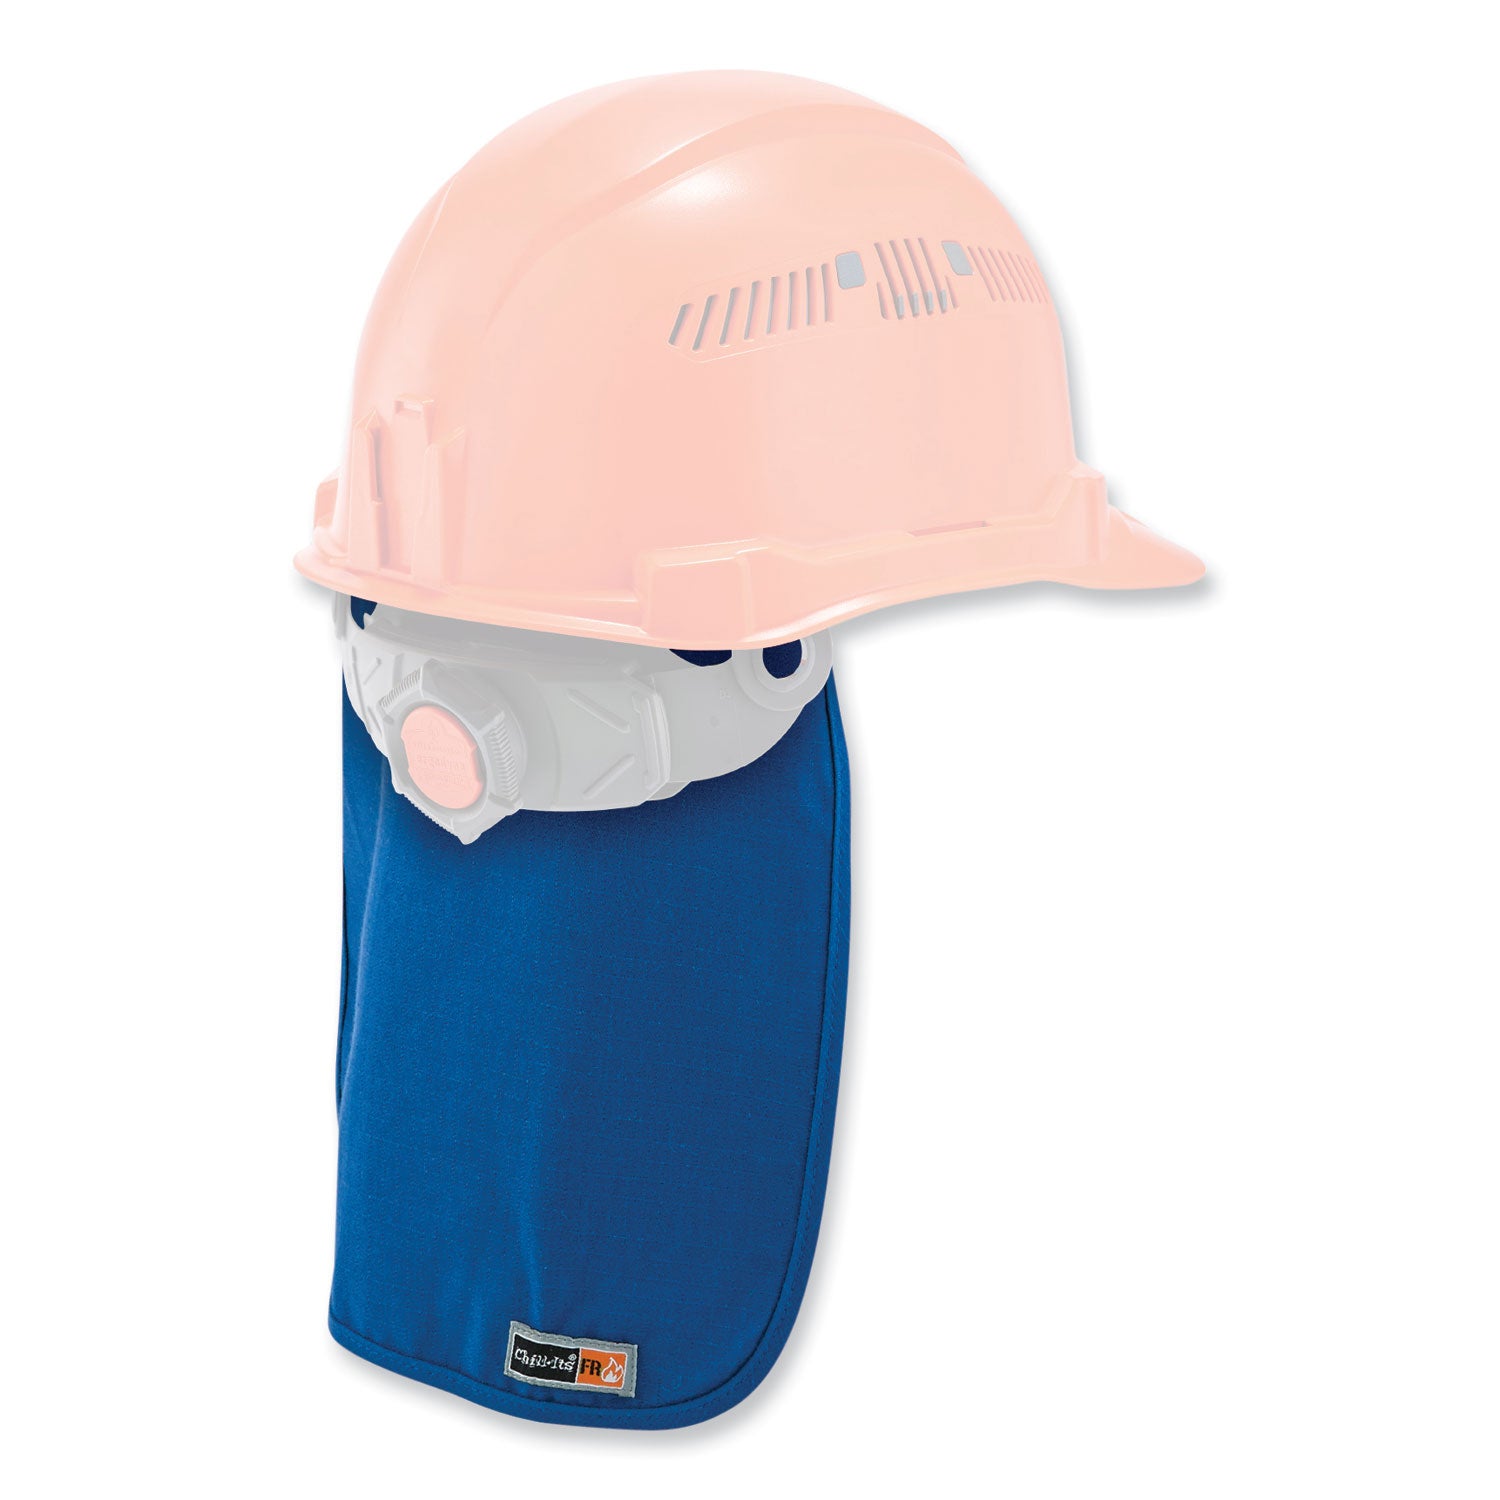 chill-its-6717fr-fr-cooling-hard-hat-pad-and-neck-shade-125-x-975-blue-ships-in-1-3-business-days_ego12657 - 2